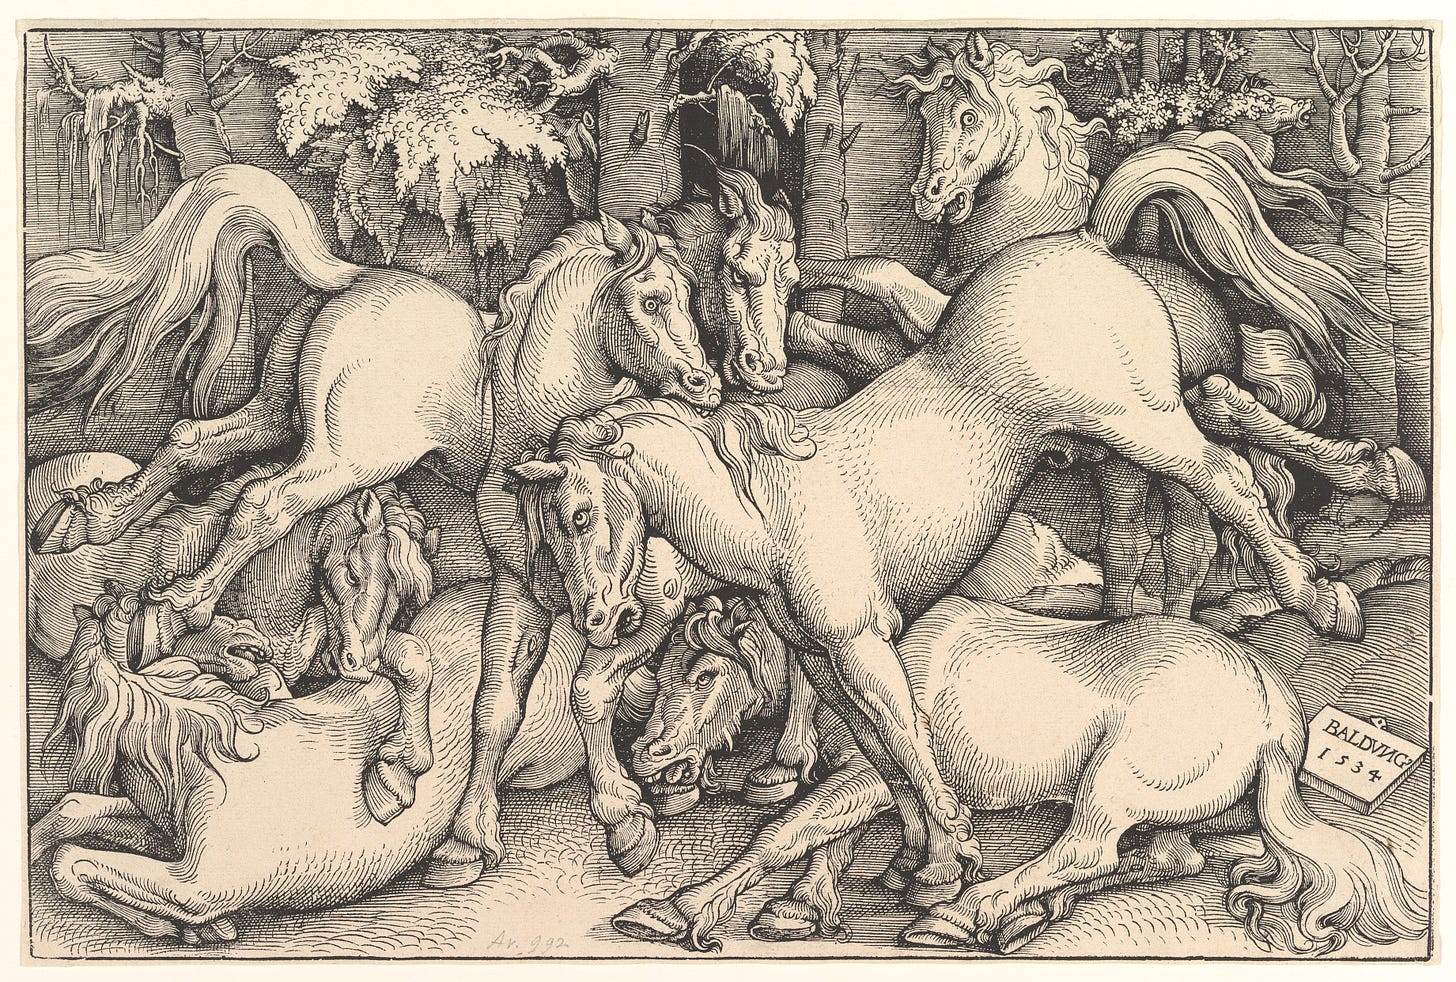 Linocut art of seven horses attacking each other